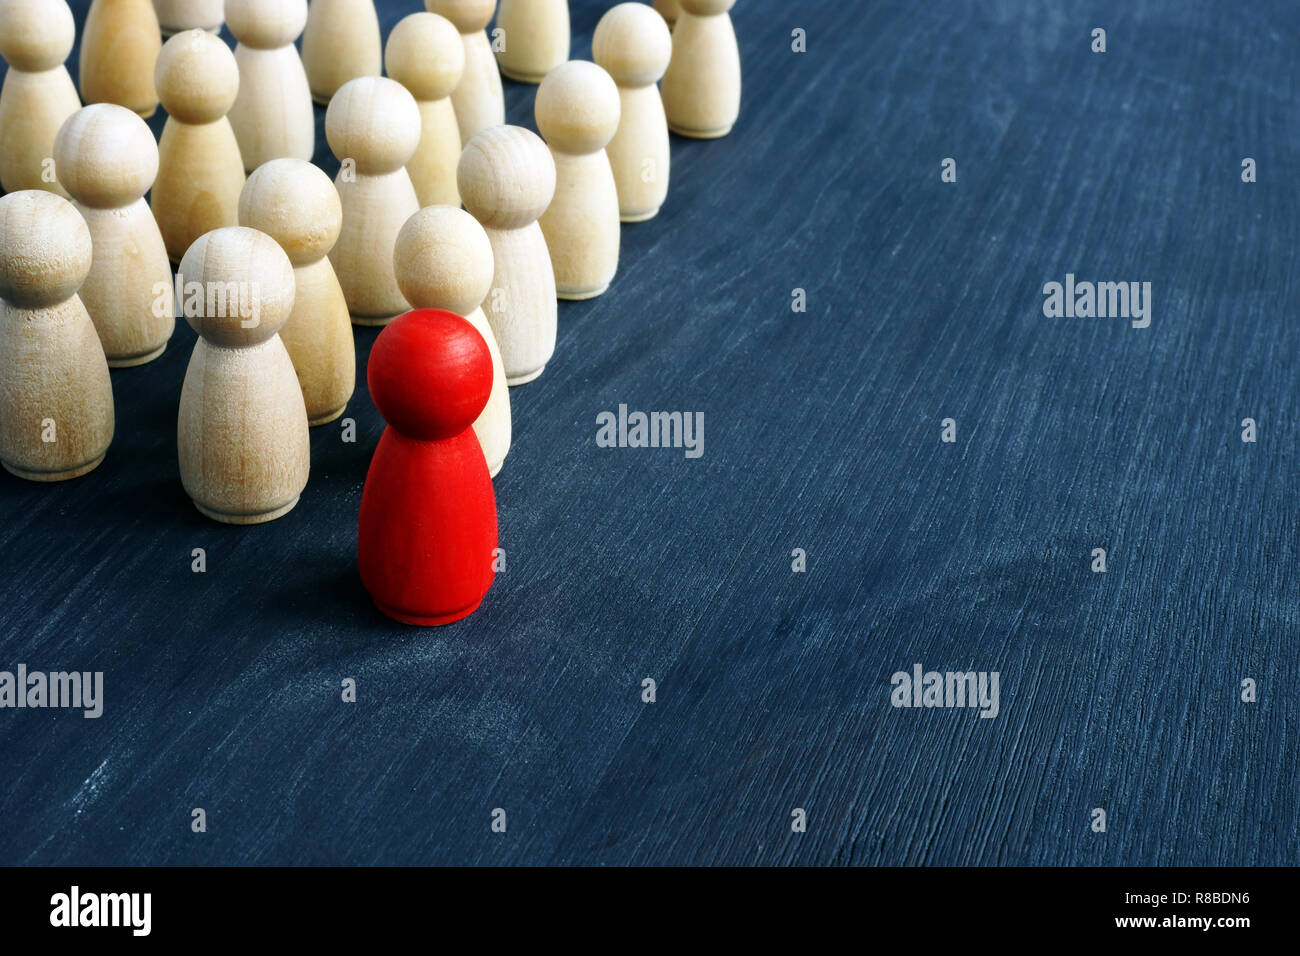 Leadership and management in business. Small figures on the desk. Stock Photo